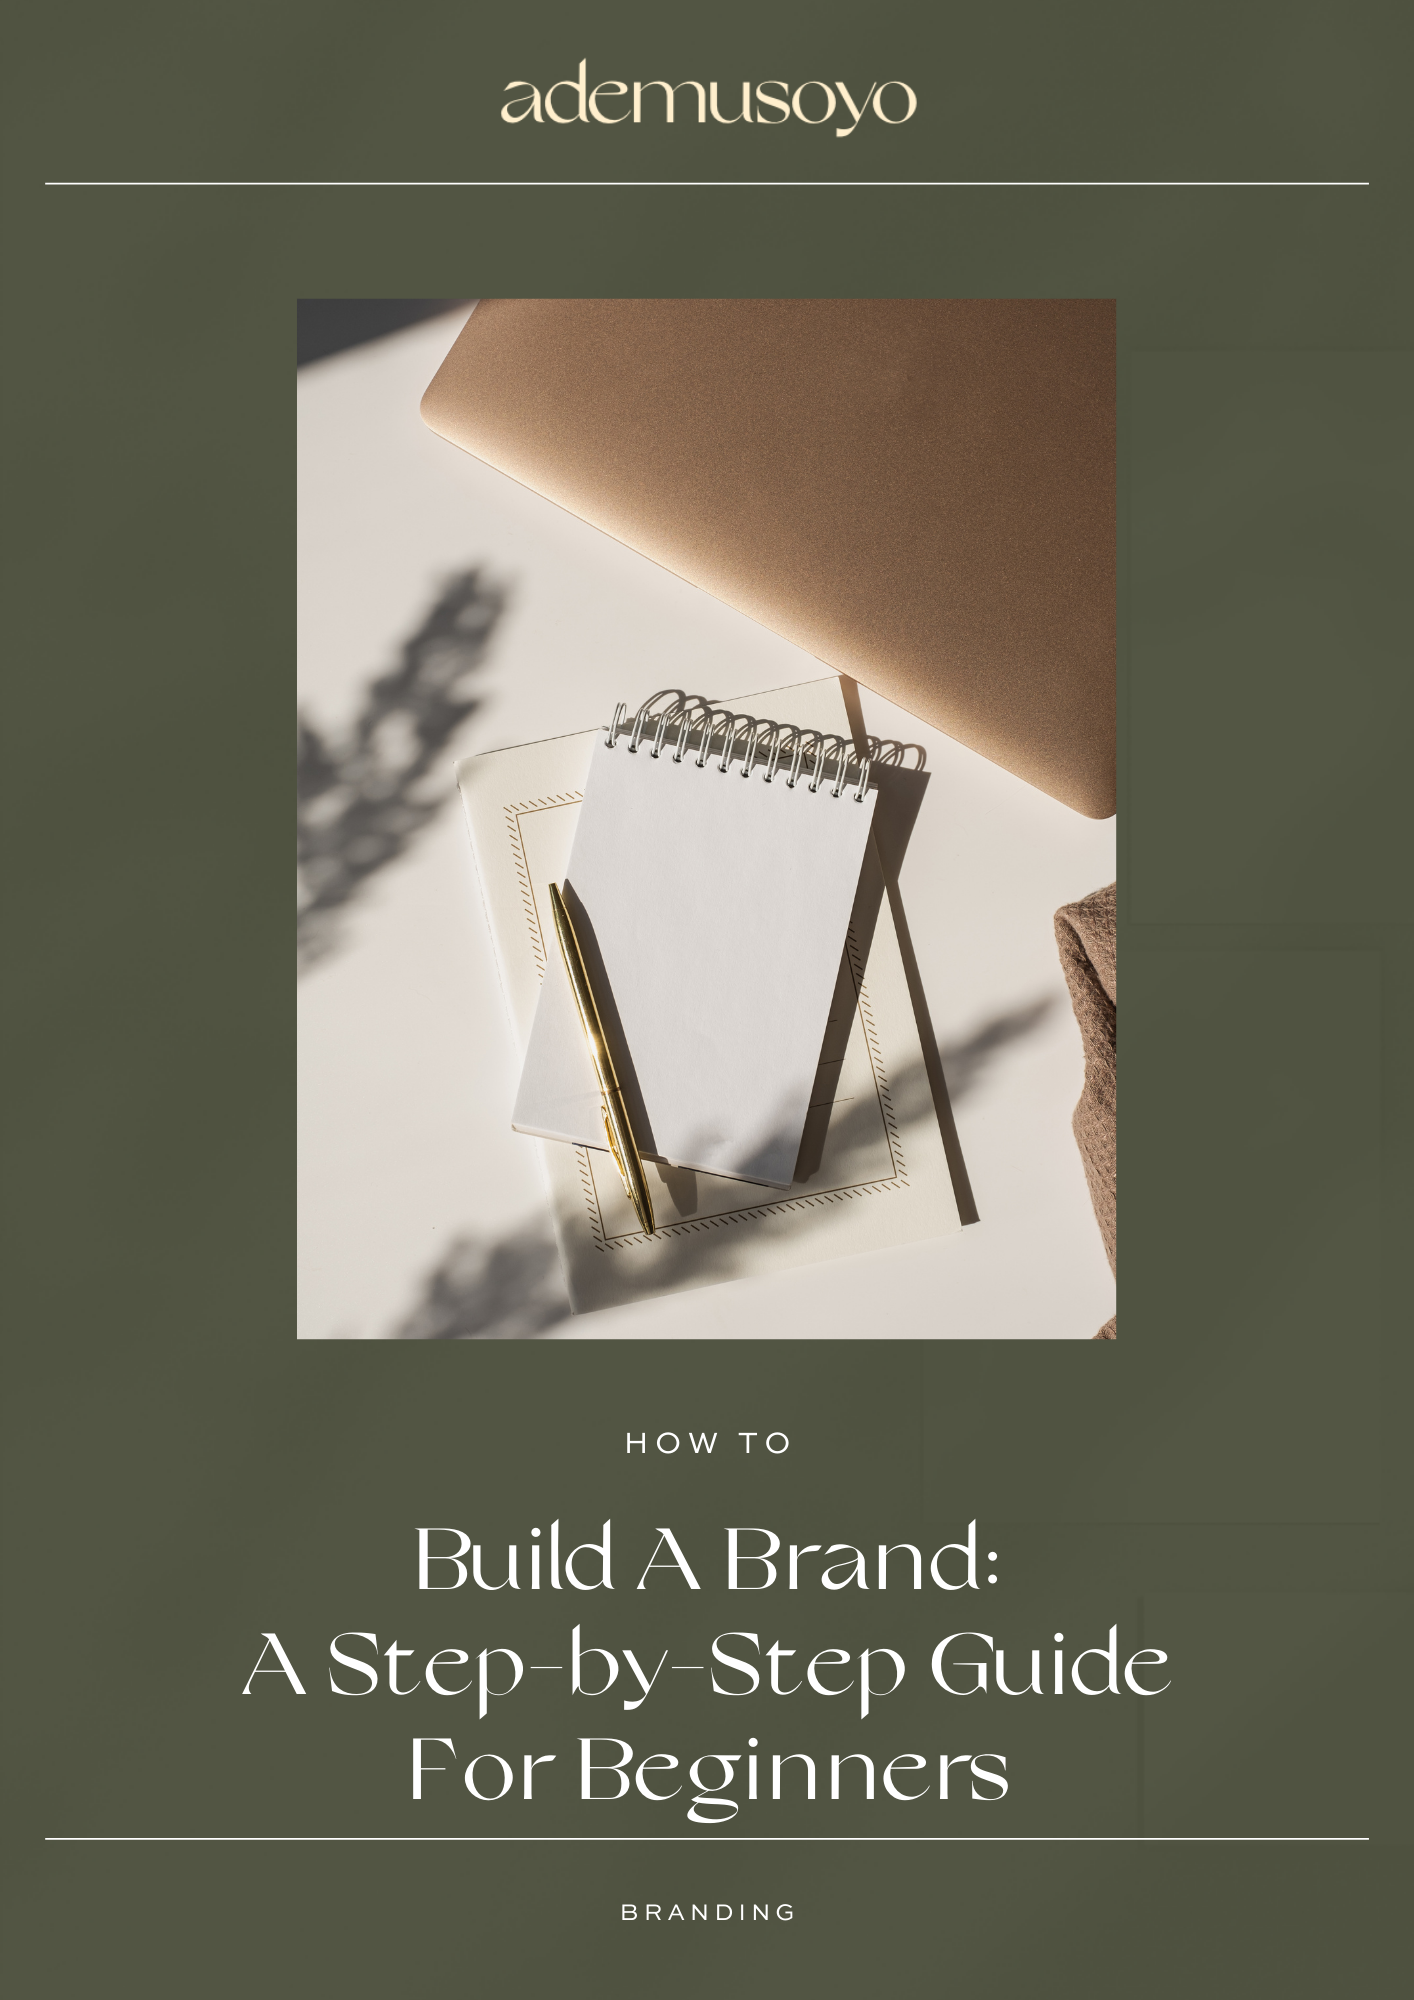 How To Build A Brand: A Step-by-Step Guide For Beginners